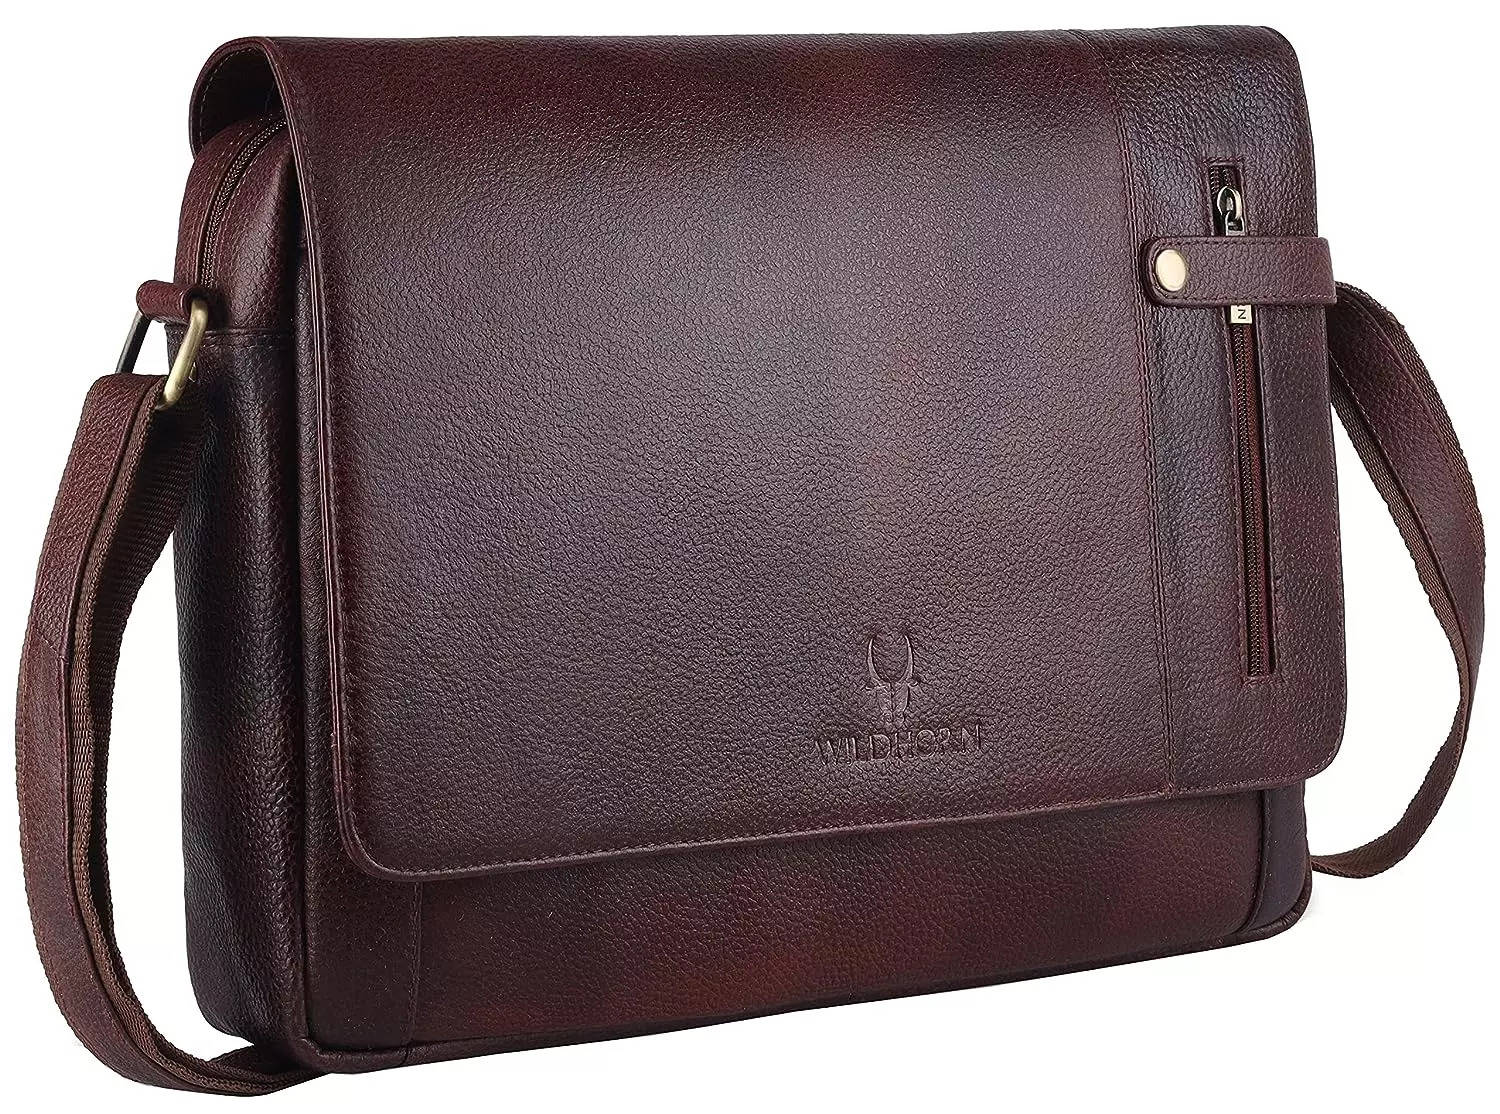 Top Quality Genuine Leather Evening Wide Strap Camera Bag With Removable  Wide Strap And Classic Lettering Perfect For Mens Crossbody Or Shoulder  Needs From Bagshop1868, $94.64 | DHgate.Com